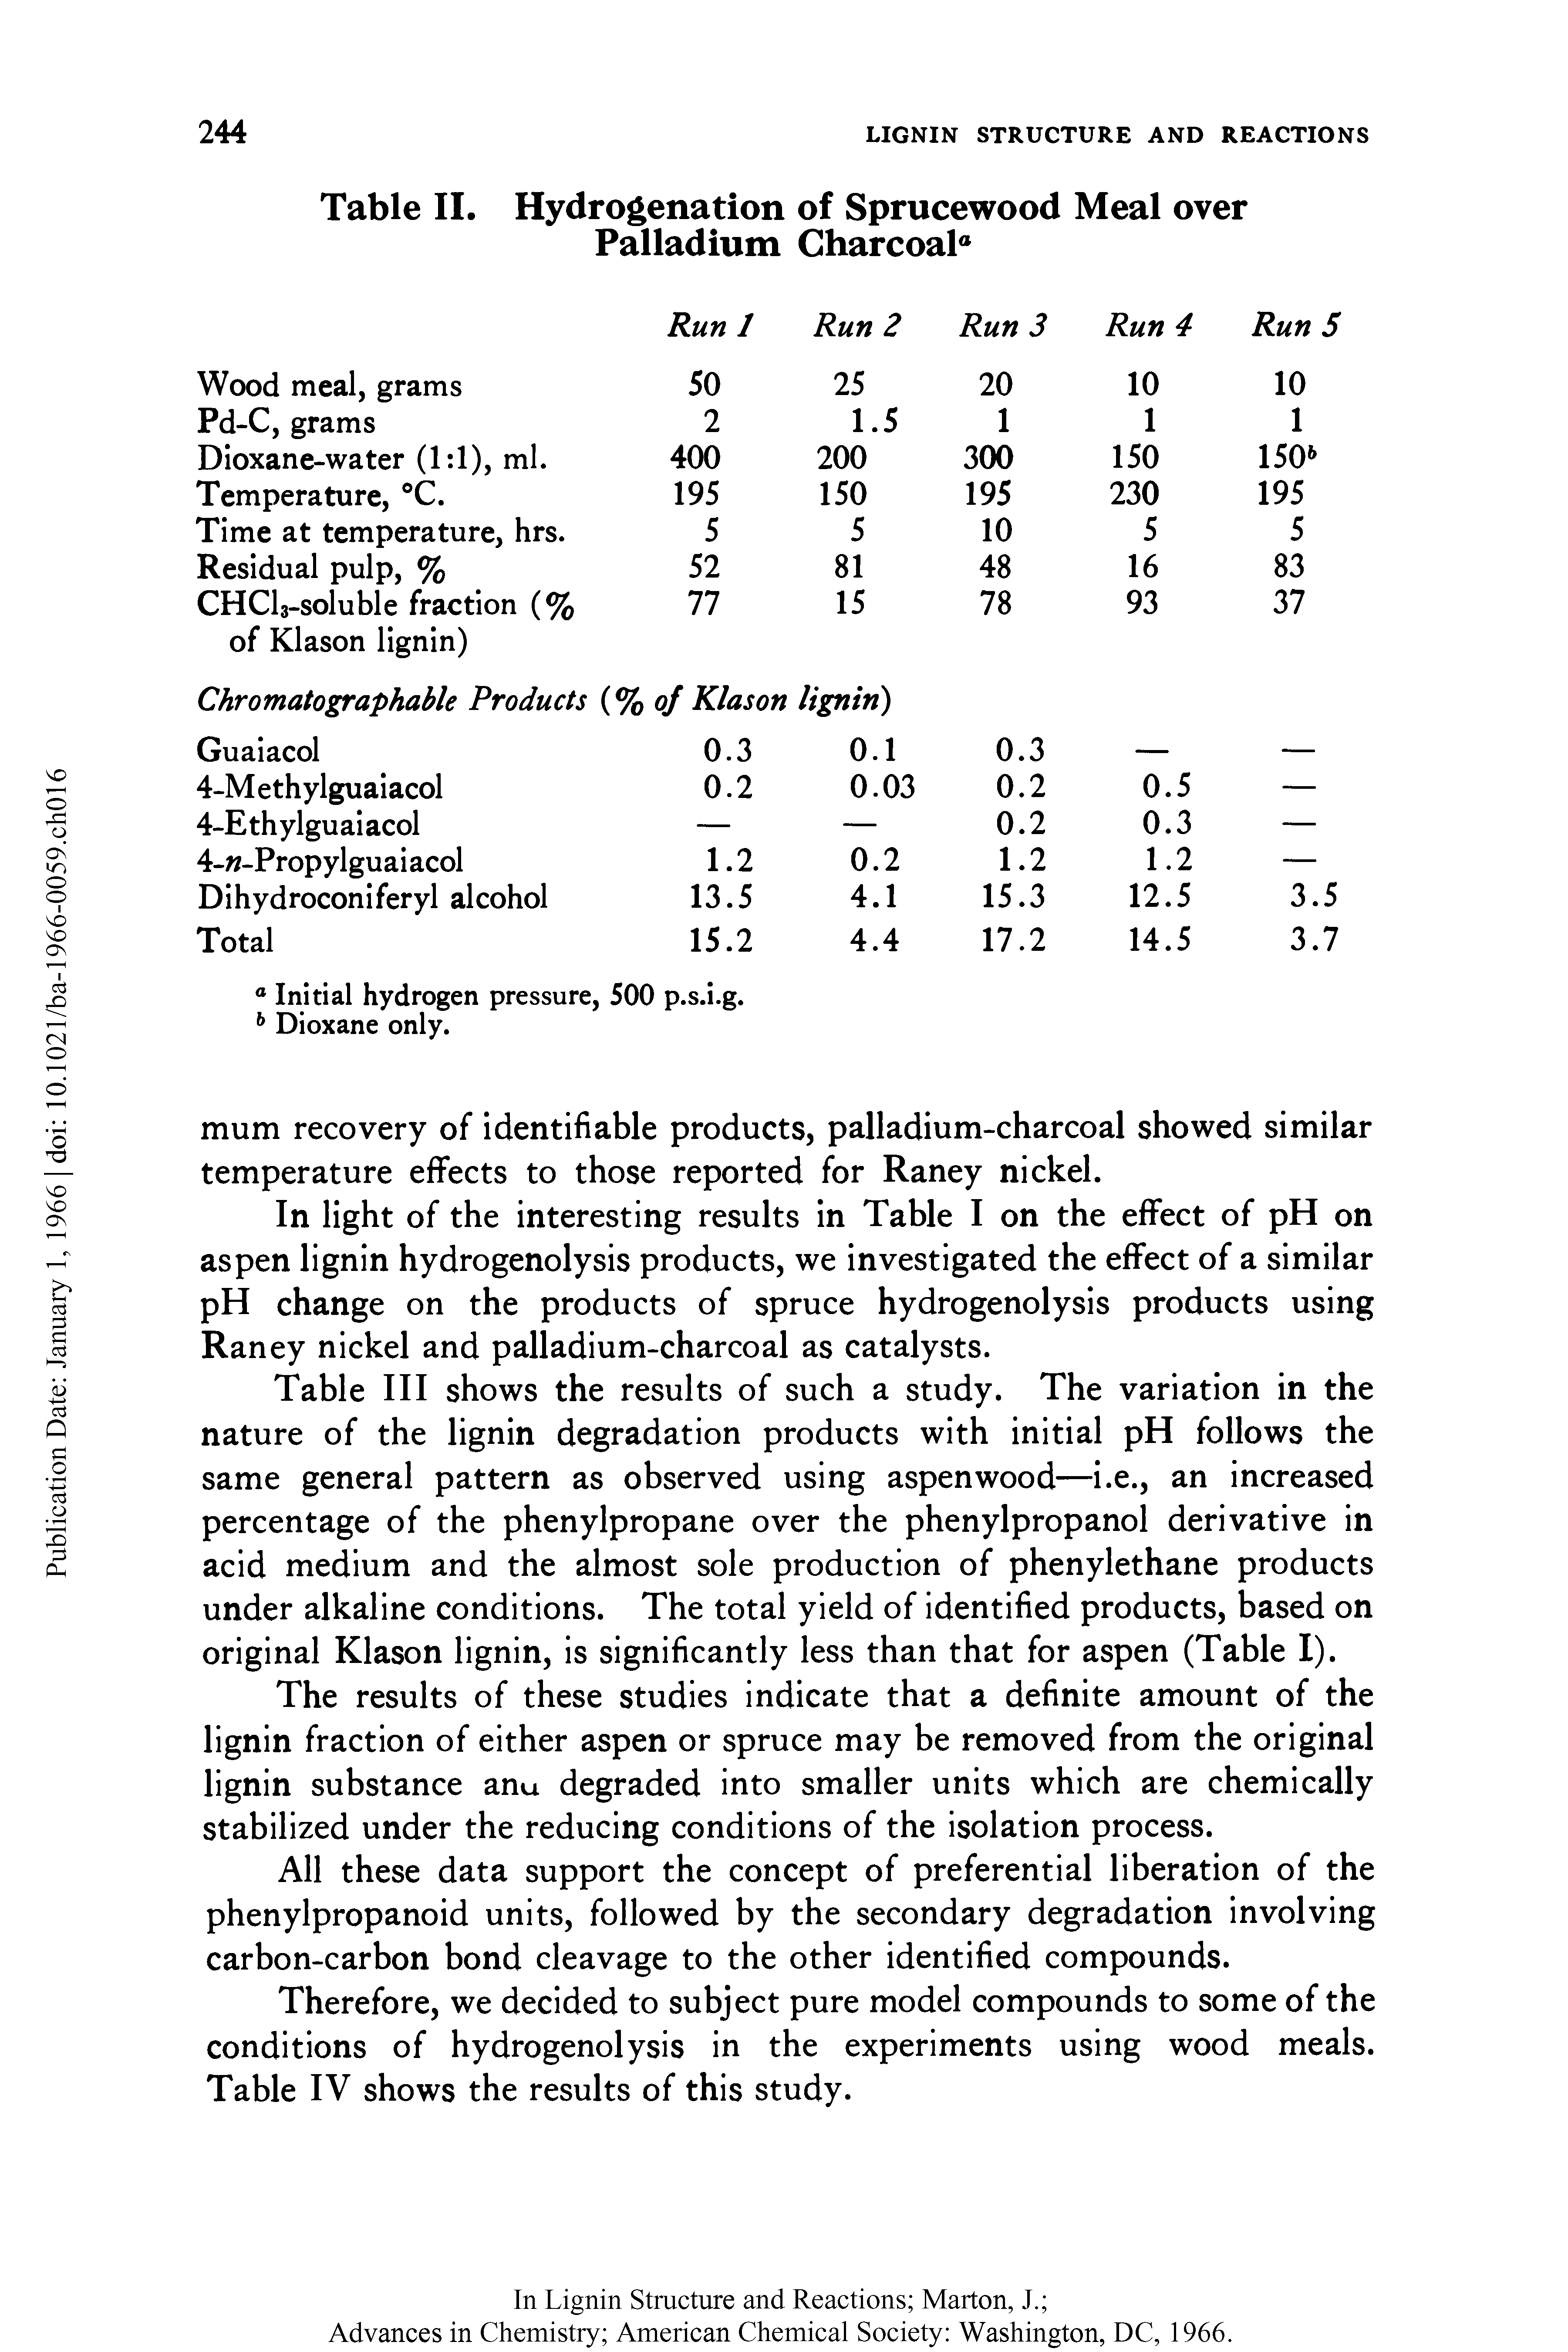 Table III shows the results of such a study. The variation in the nature of the lignin degradation products with initial pH follows the same general pattern as observed using aspen wood—i.e., an increased percentage of the phenylpropane over the phenylpropanol derivative in acid medium and the almost sole production of phenylethane products under alkaline conditions. The total yield of identified products, based on original Klason lignin, is significantly less than that for aspen (Table I).